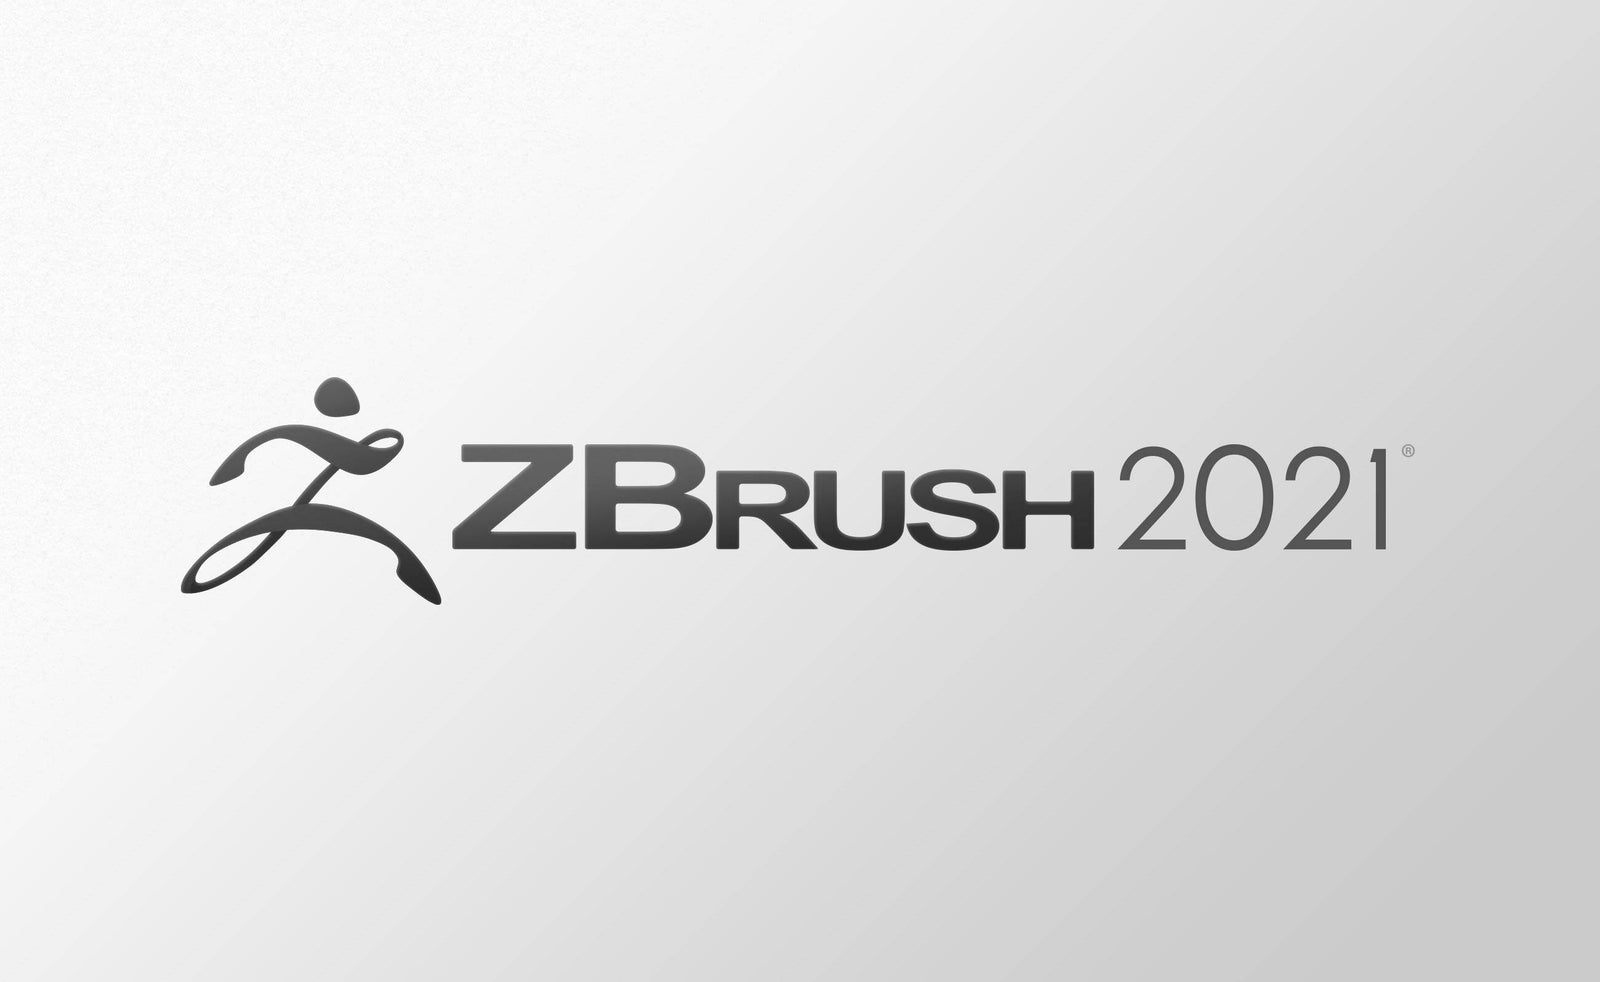 how many systems can u use a single.zbrush license.on